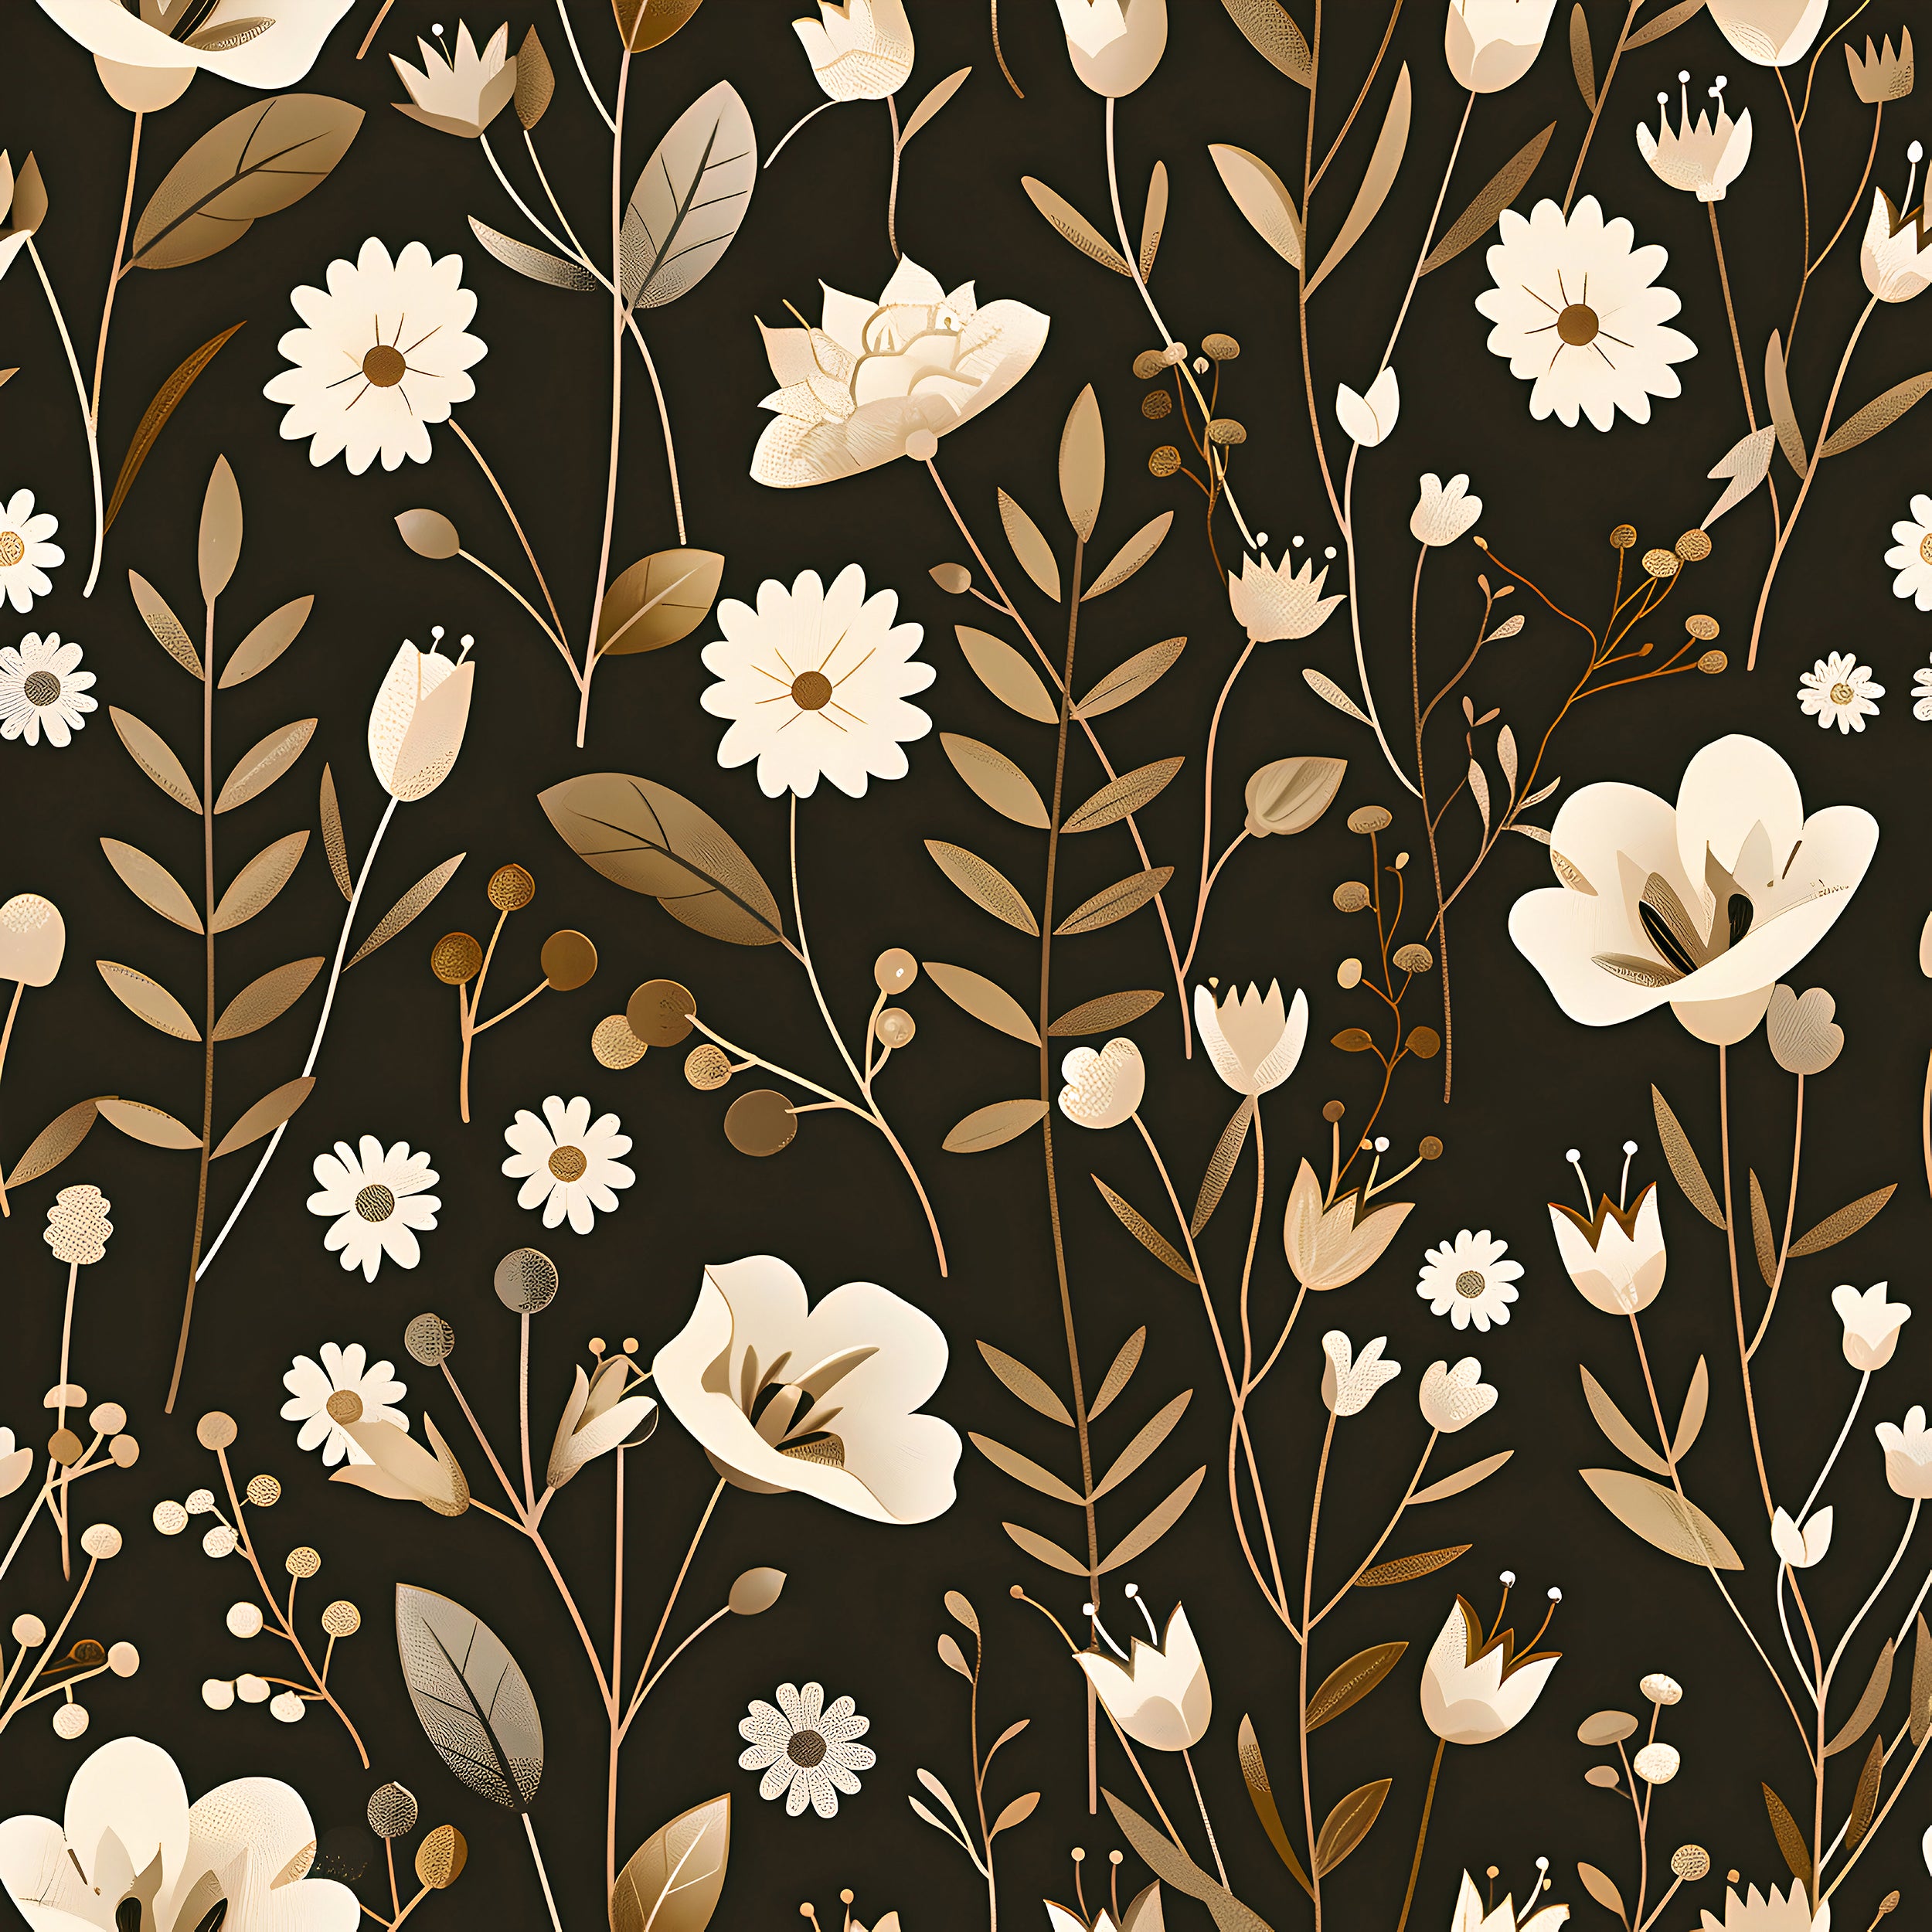 Dark Meadow Floral Wallpaper, White and Brown Botanical Decal, Wild Flowers Wallpaper, Peel and Stick Removable Vintage Flower Decal